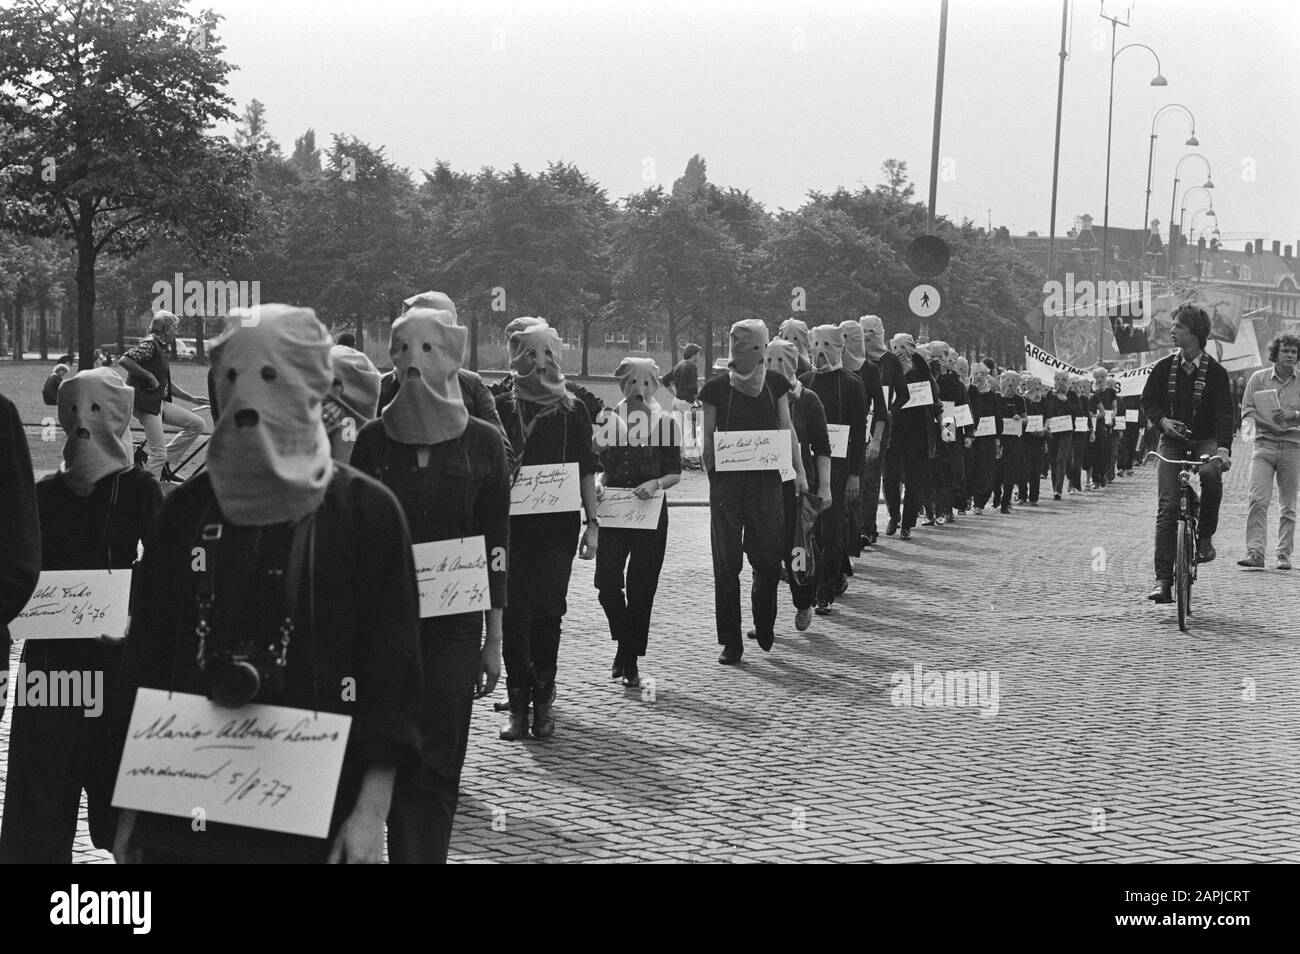 Demonstration in Amsterdam for a hundred missing artists Description: Protesters in Amsterdam, with hoods on, perform in parade with signs showing the names of 100 missing artists Date: September 12 1981 Location: Amsterdam, Noord-Holland Keywords: artists, demonstrations, signs Stock Photo